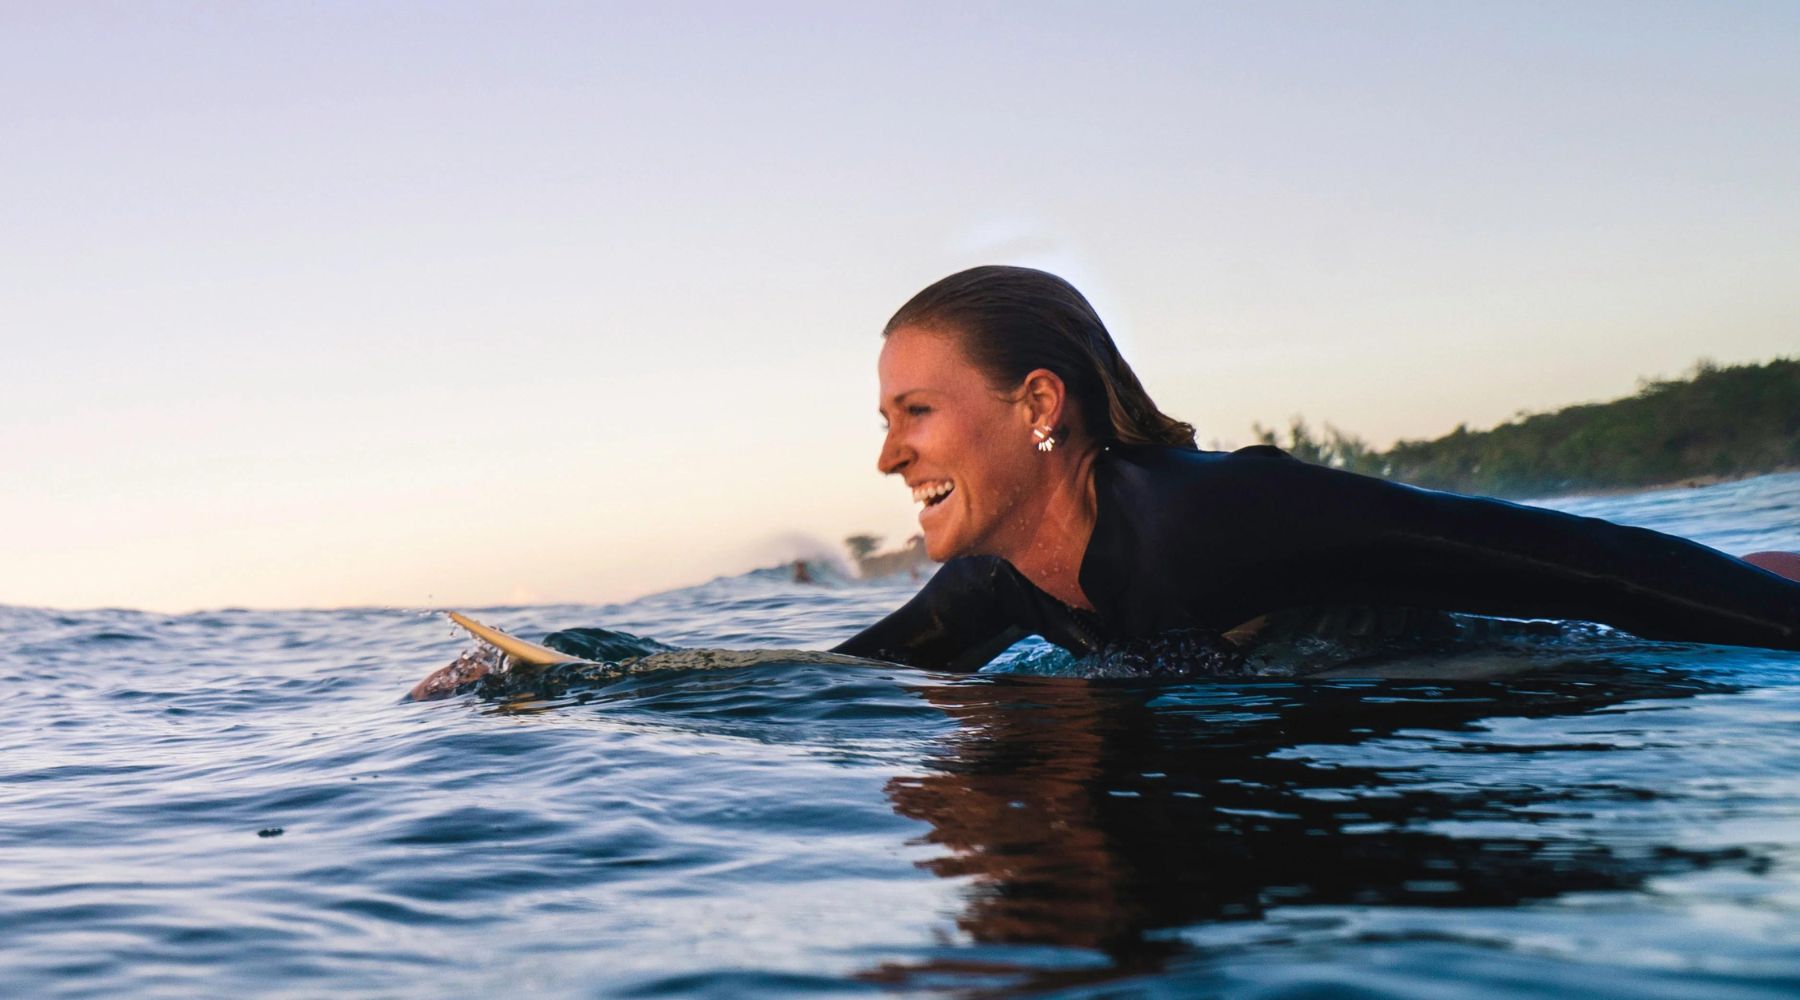 Similar Paths to the Same Destination: Spirituality in Surfing, Yoga, and Life